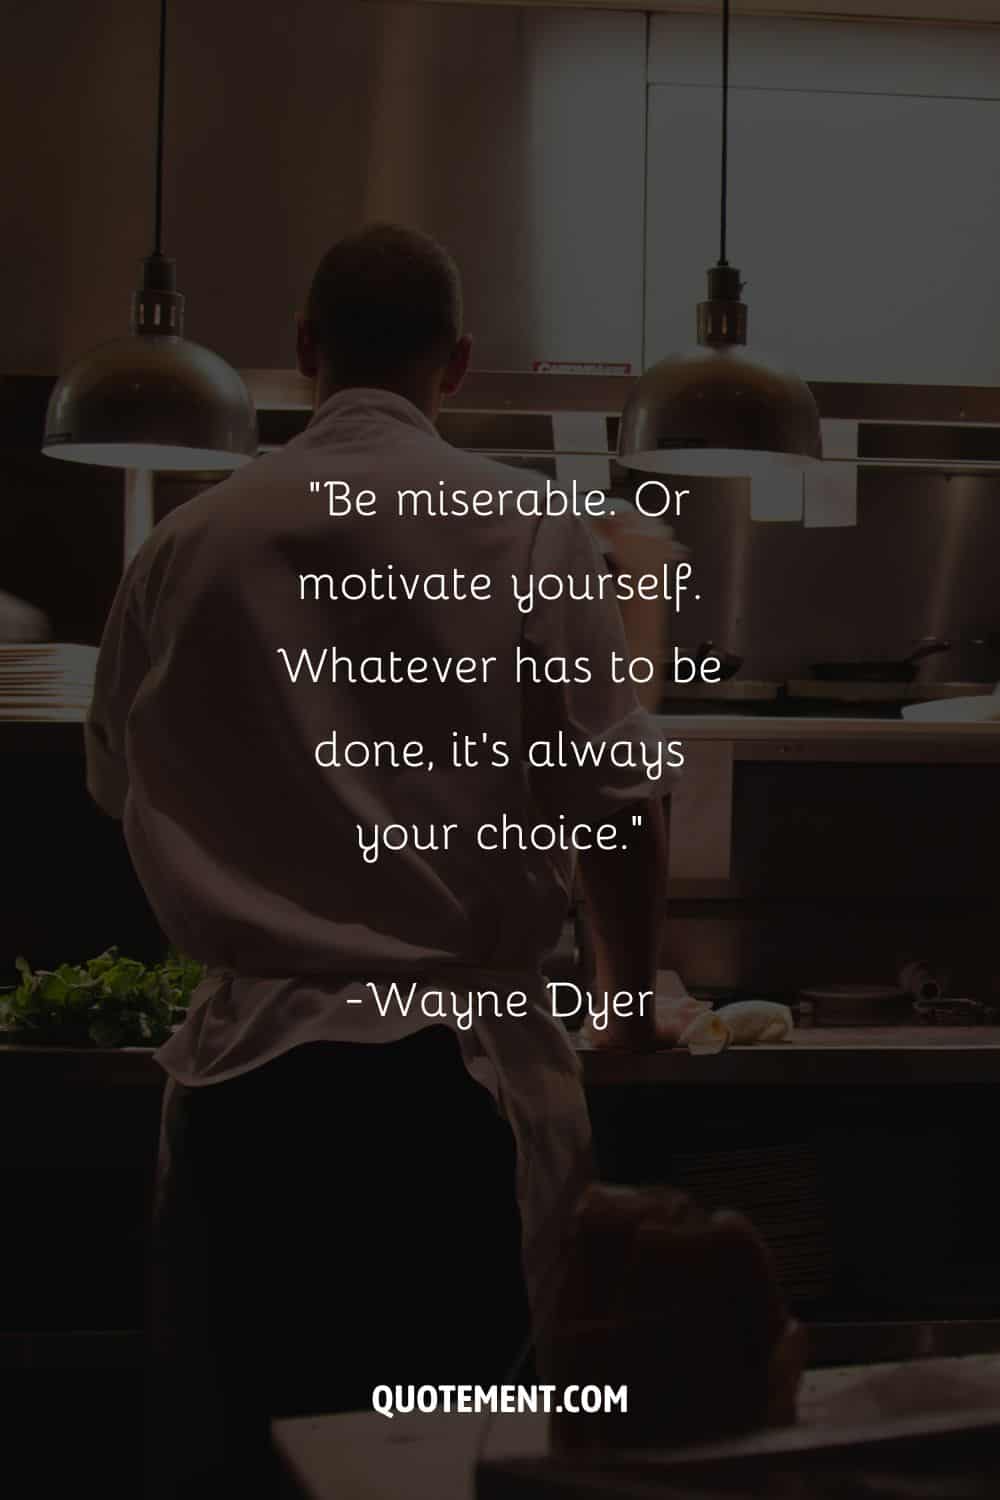 Image of a chef preparing food representing an inspirational quote for employees.
